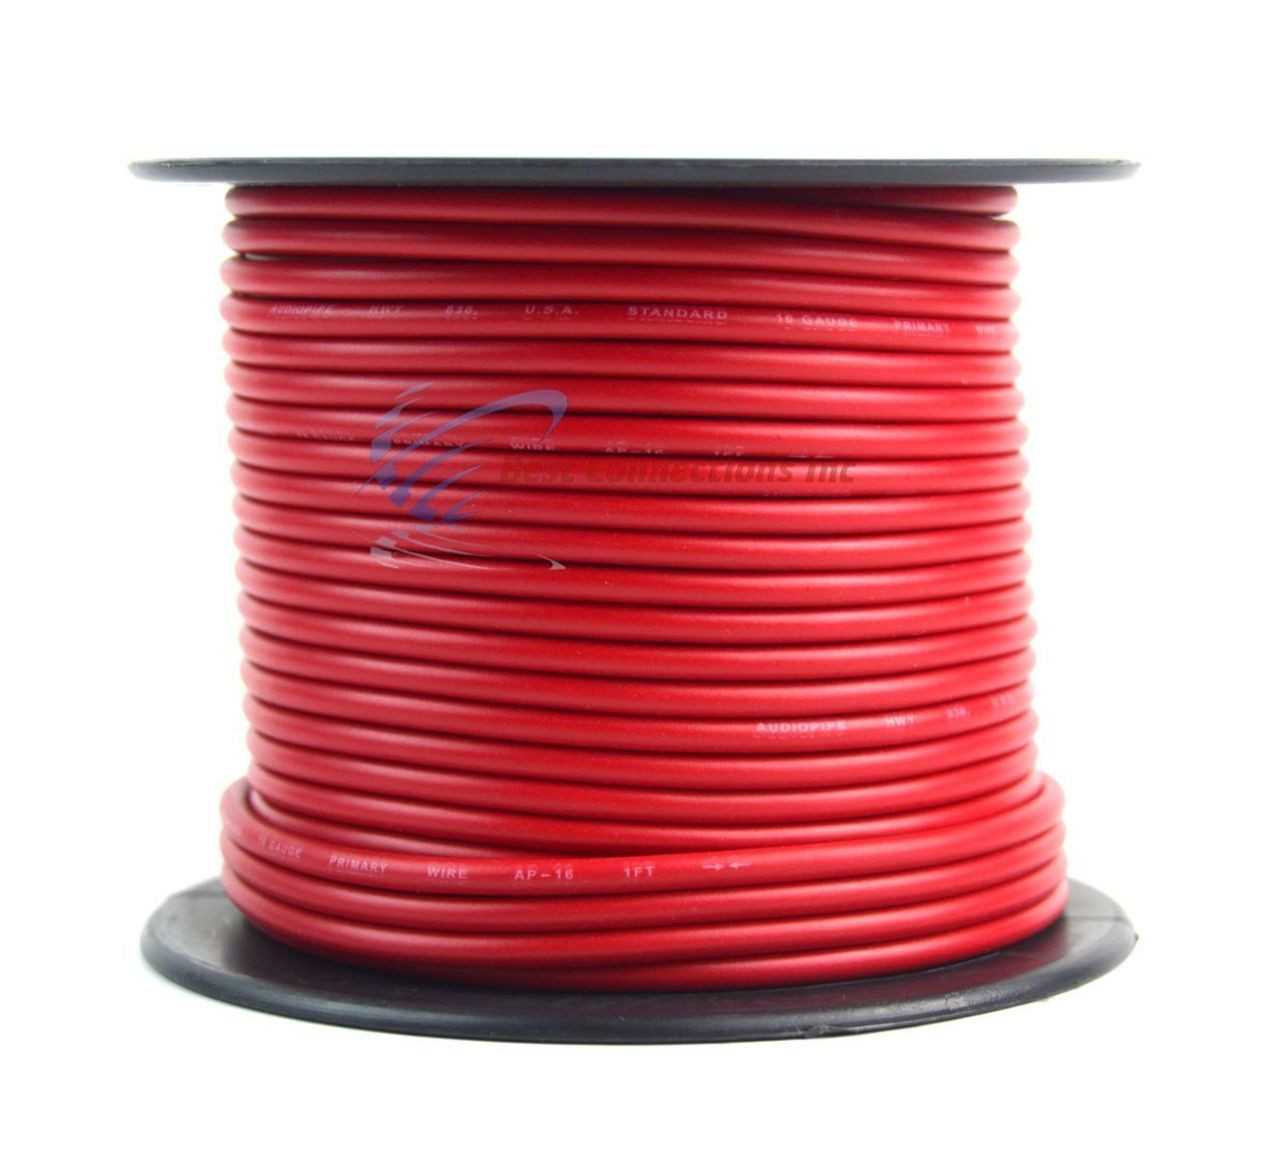 16 GAUGE WIRE RED & BLACK POWER GROUND 100 FT EACH PRIMARY STRANDED COPPER  CLAD - Best Connections